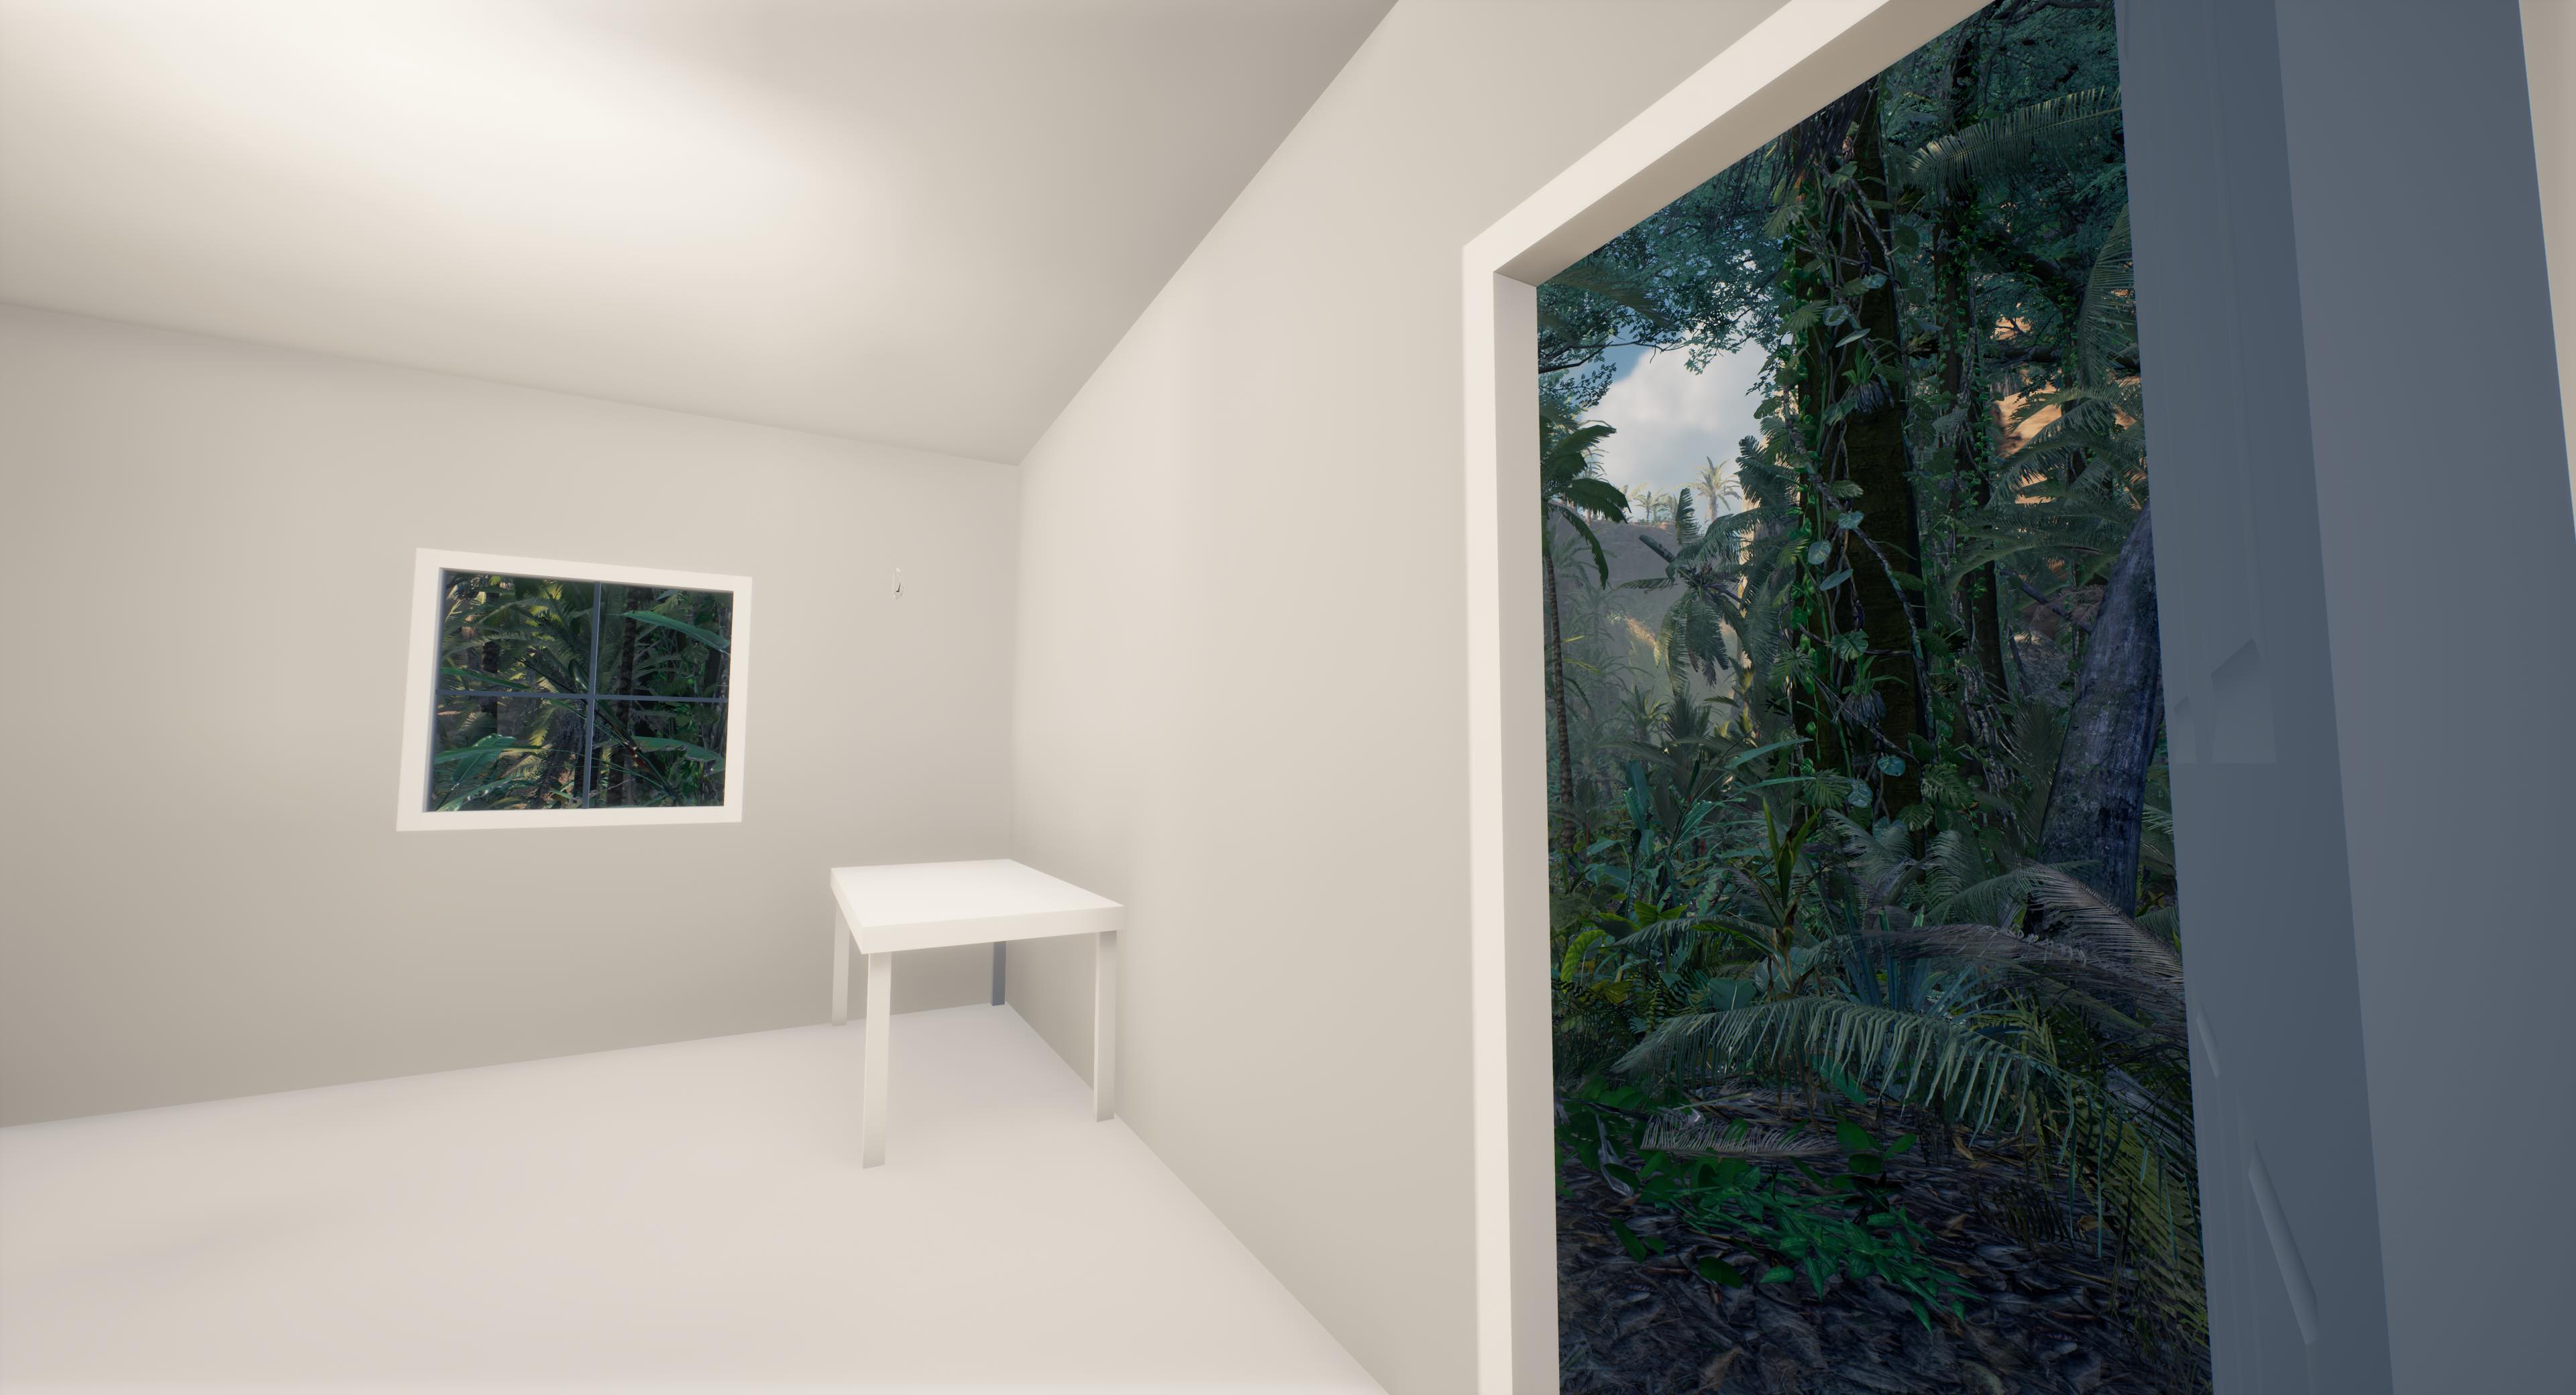 A room looking out onto a lush forest, one of the virtual landscapes in the mixed-reality experience, The Edge of the Present. Photo: Alex Davies